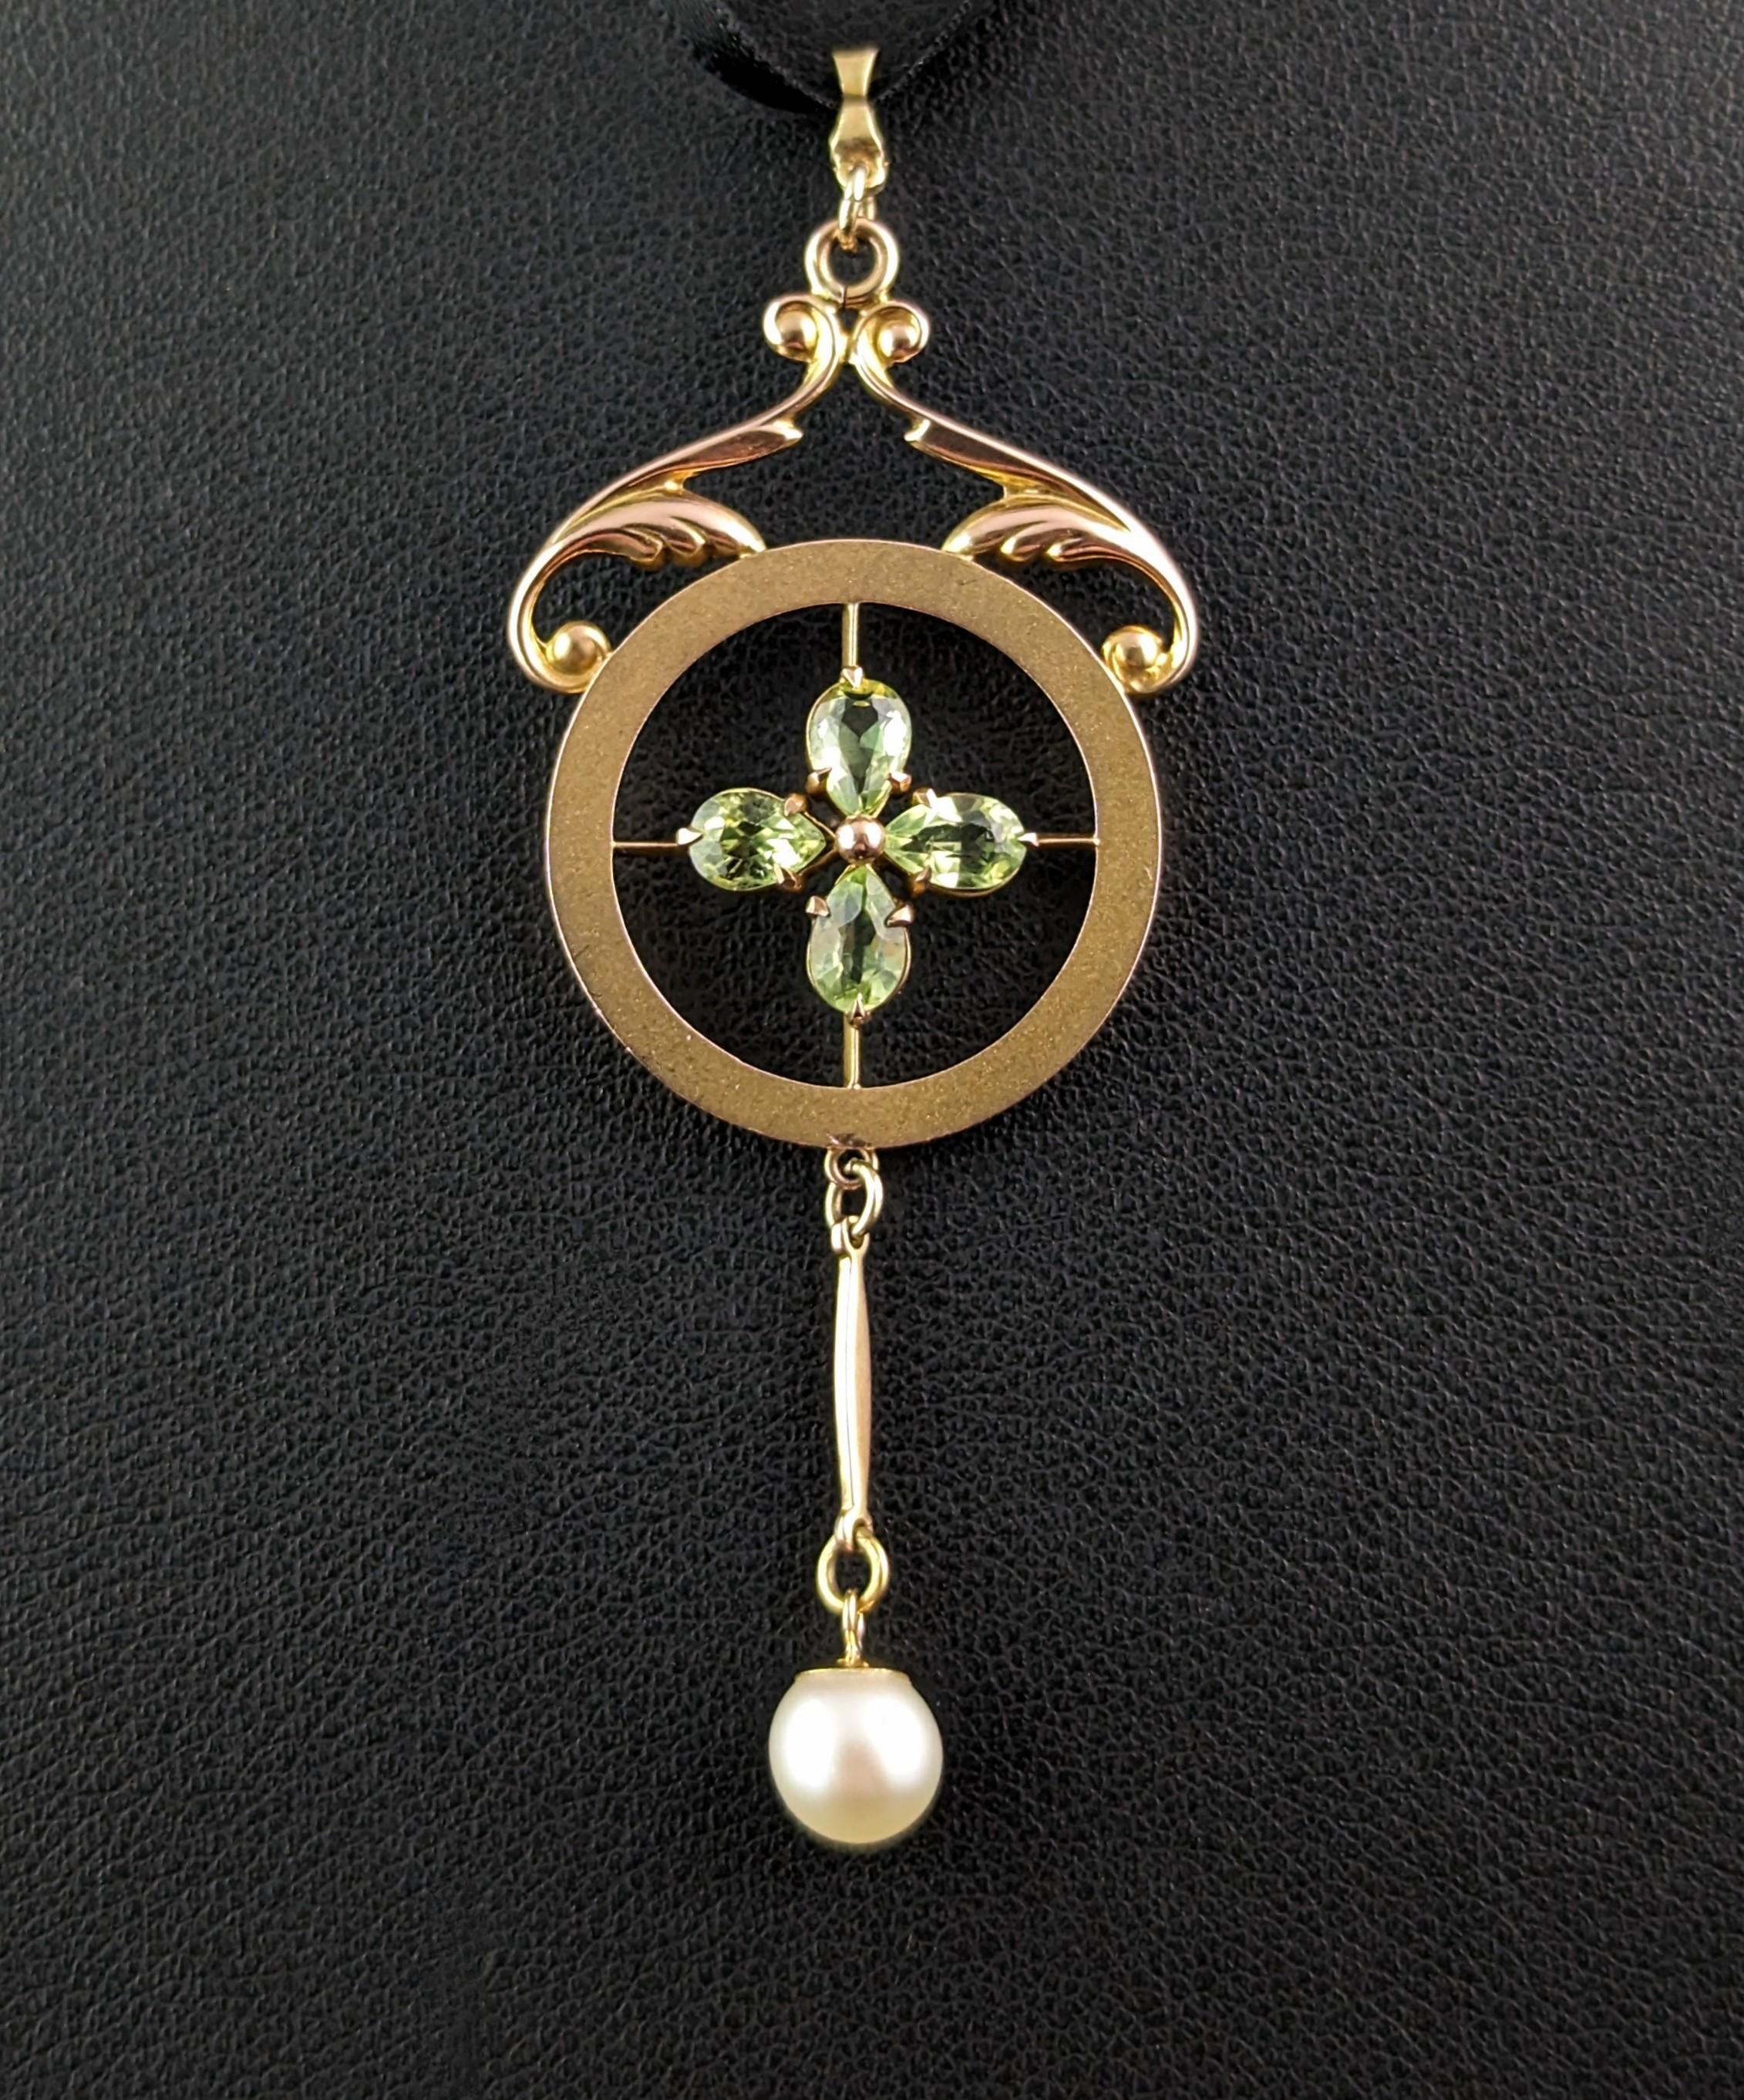 This beautiful antique peridot and pearl floral pendant is so pretty and elegant.

This pendant has a circular design top with scrolling gold arches atop and the most beautiful Peridot flower to the centre of the circle, the pear cut peridots make